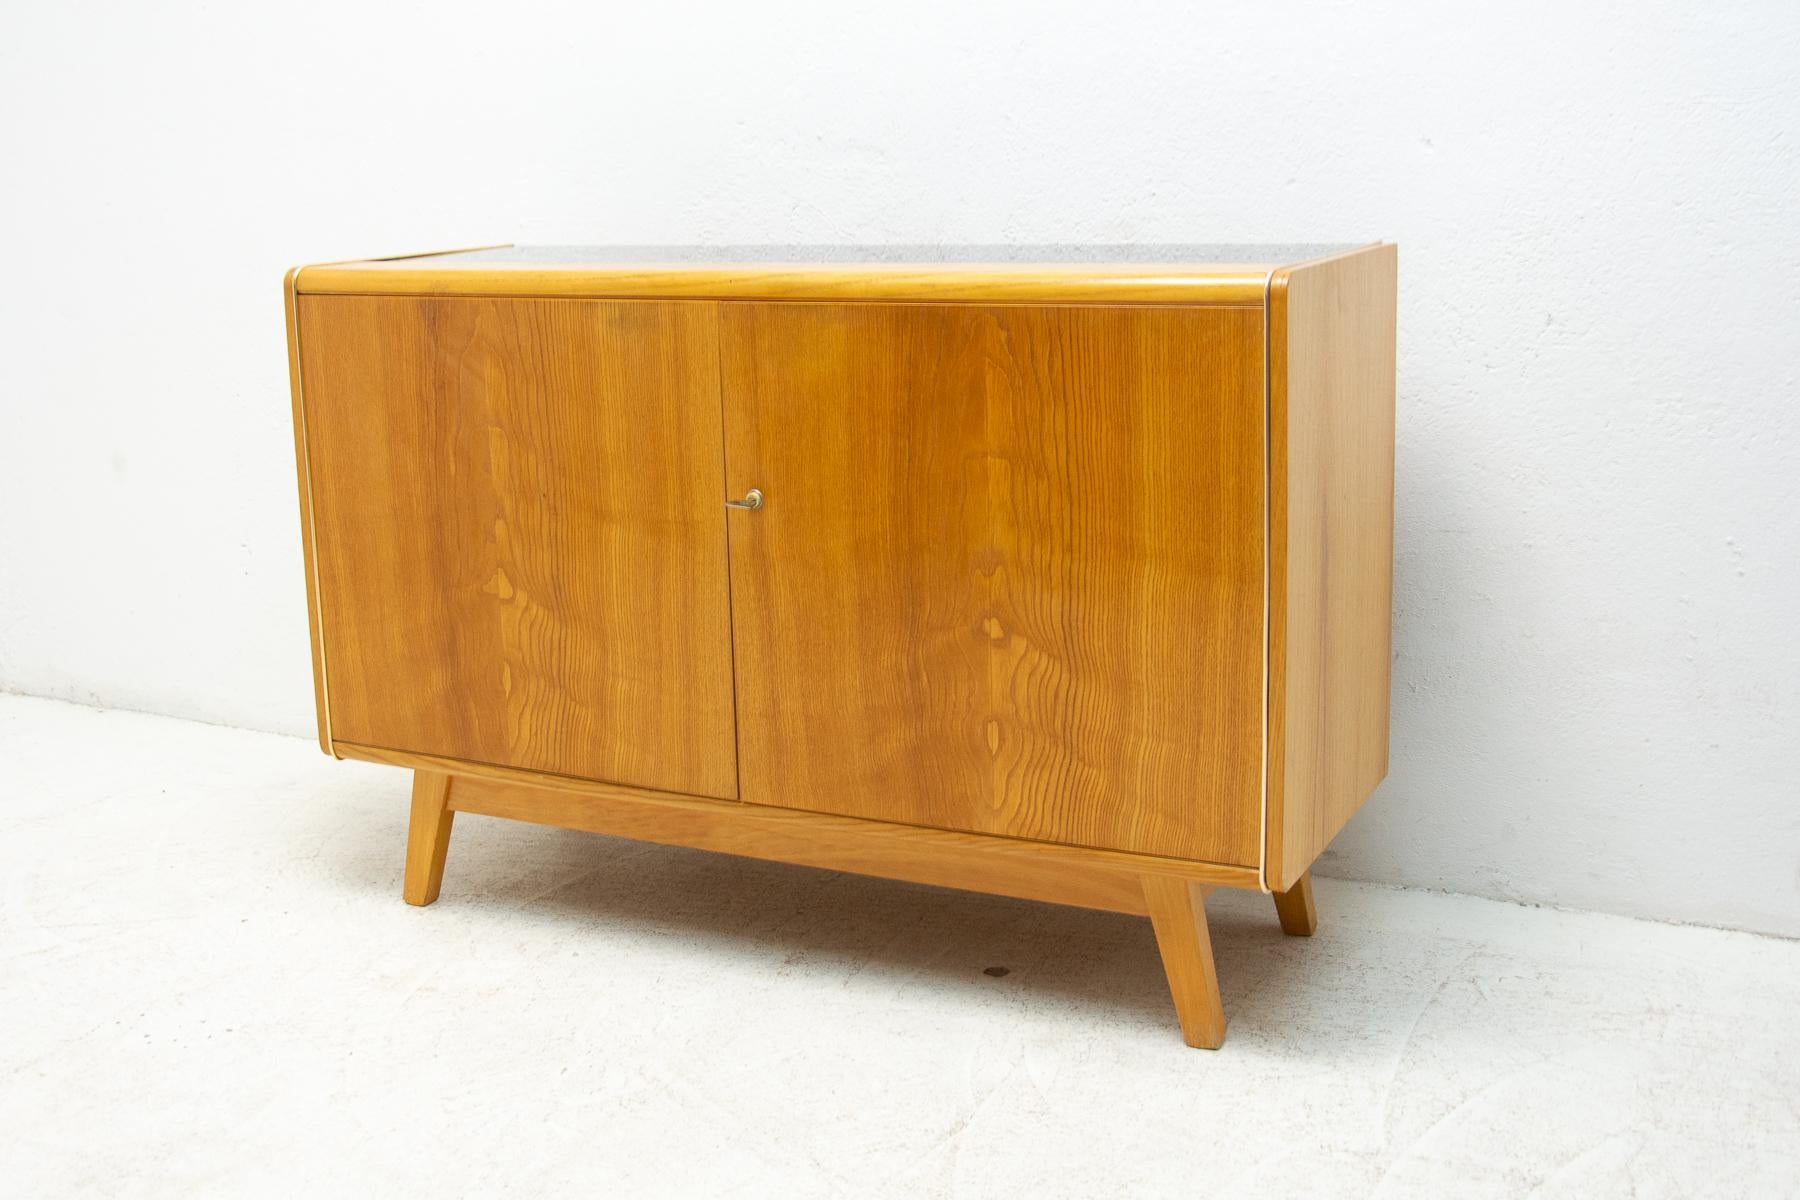 Midcentury dresser designed by Hubert Nepožitek & Bohumil Landsman for Jitona in the 1970s.
It was made as a part of living room sector model U-372386. Made in Czechoslovakia.
In good preserved Vintage condition, showing signs of age and